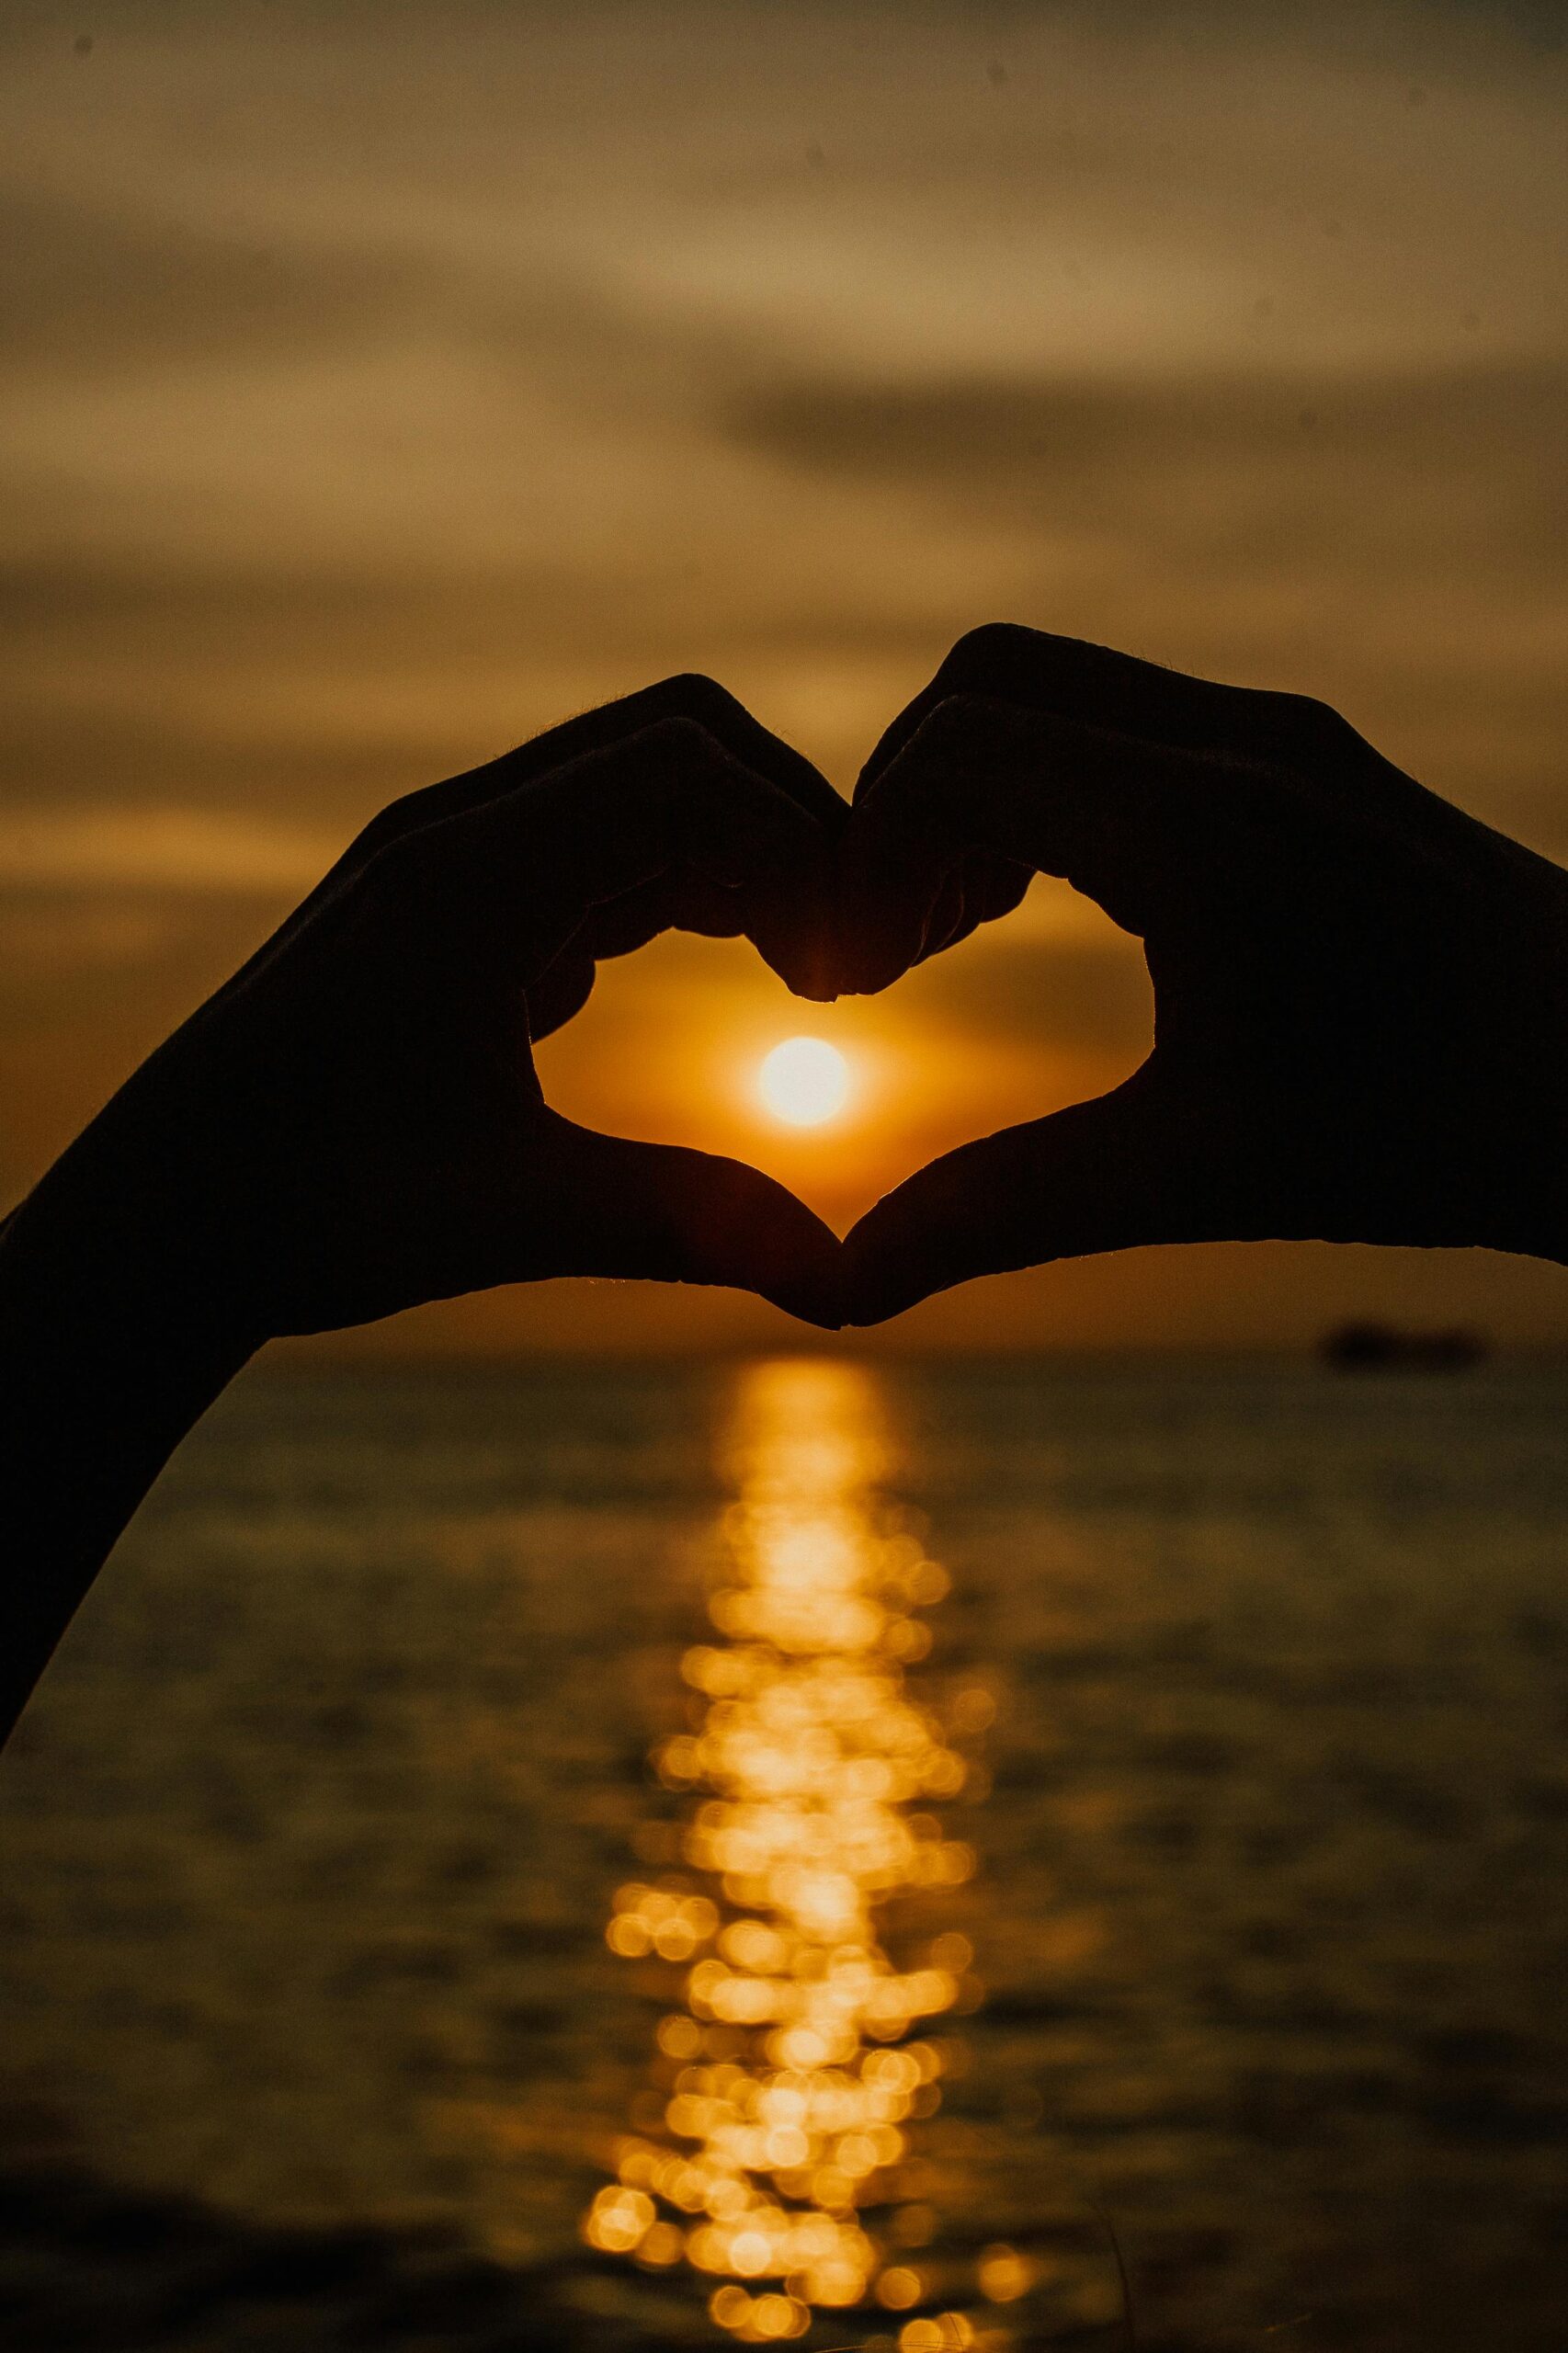 A pair of hands creating a heart shape, brilliantly silhouetted against the sun in the background.